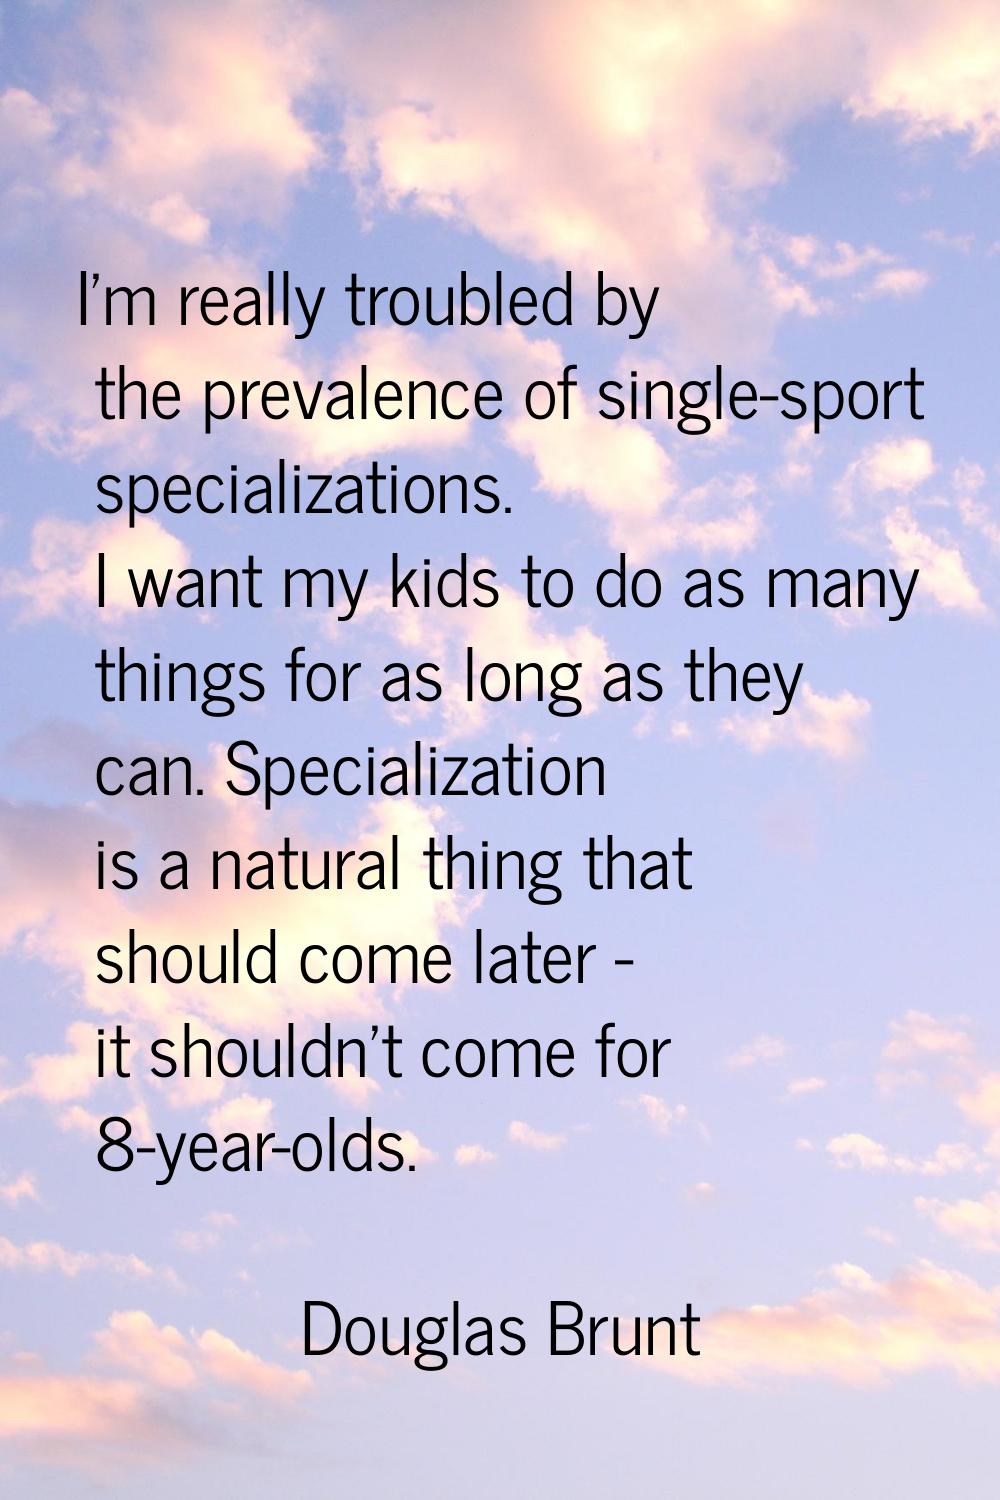 I'm really troubled by the prevalence of single-sport specializations. I want my kids to do as many